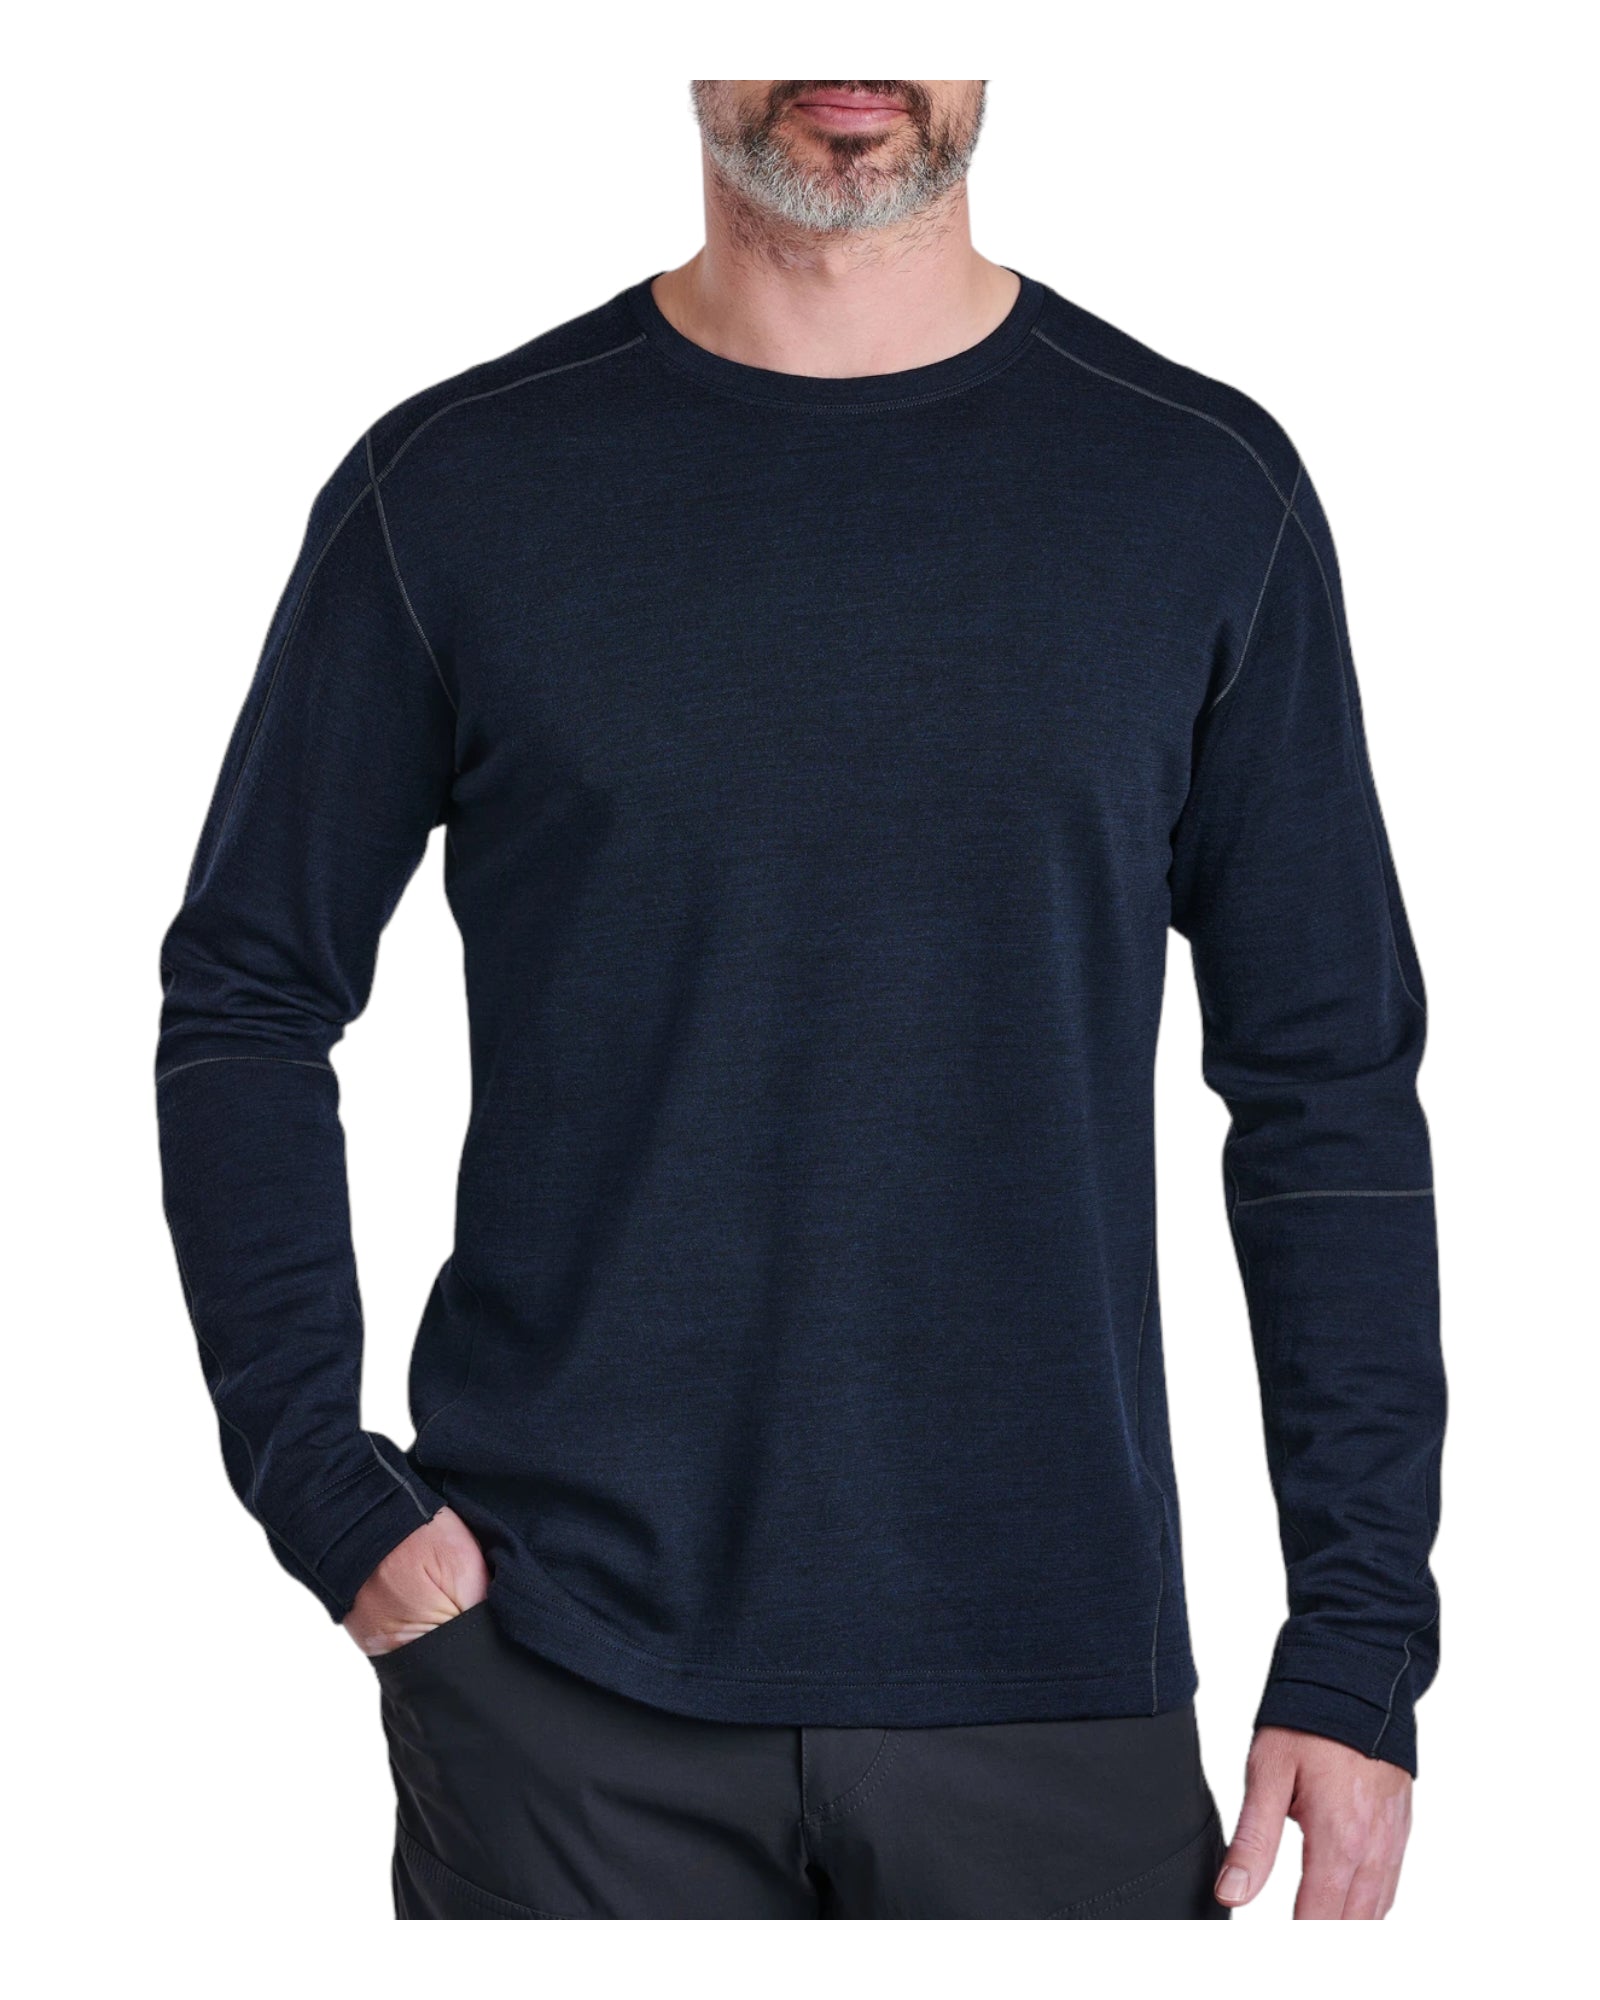 Experience the KÜHL difference with the INVIGORATR MERINO CREW. We chose a superfine Merino so it’s softer on your skin.